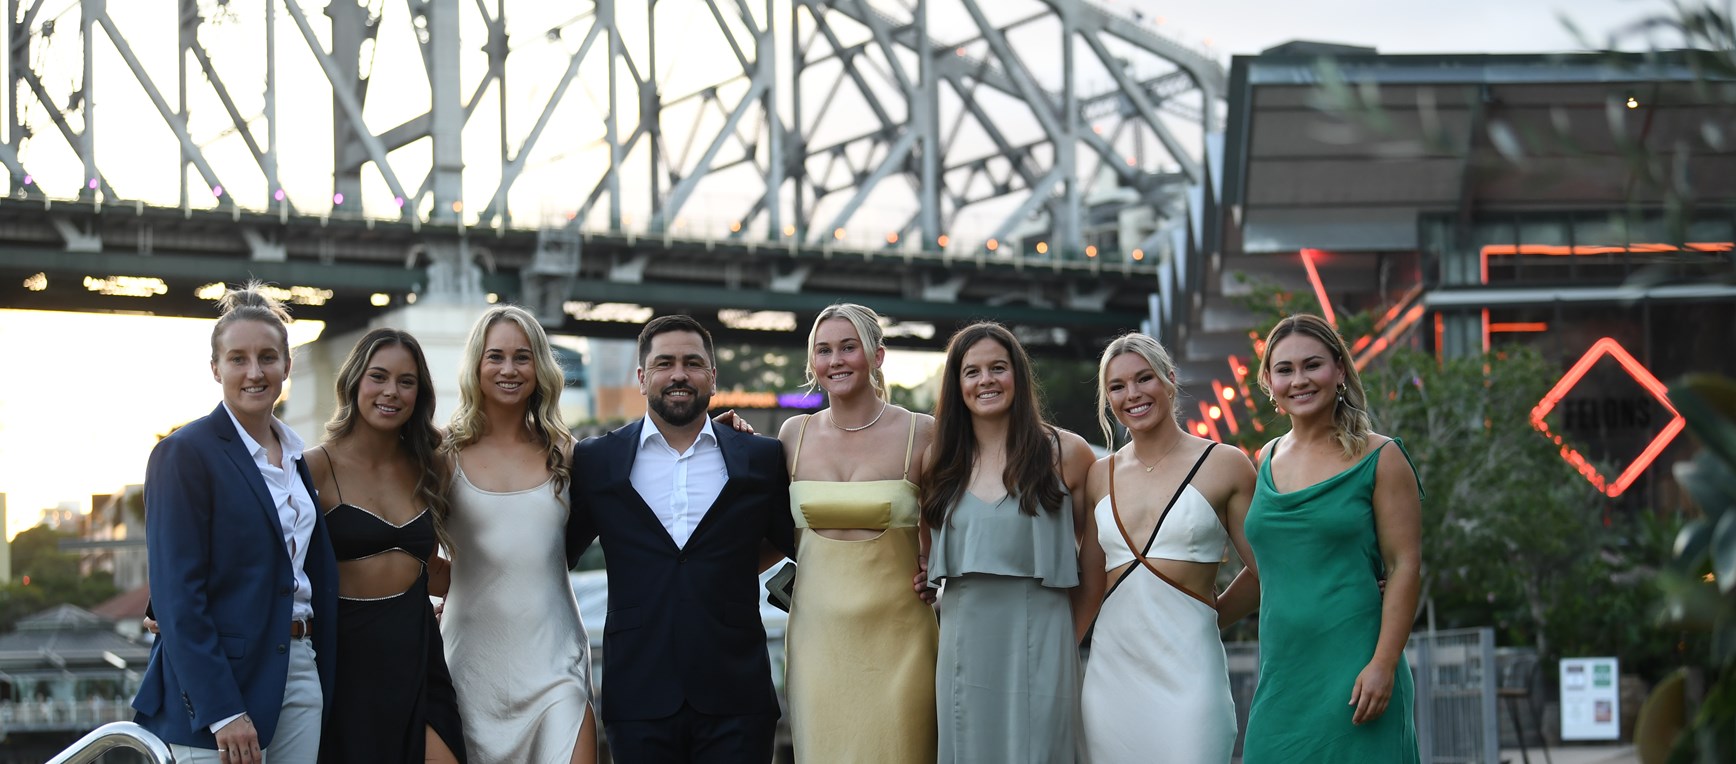 In pictures: 2021 NRLW Awards